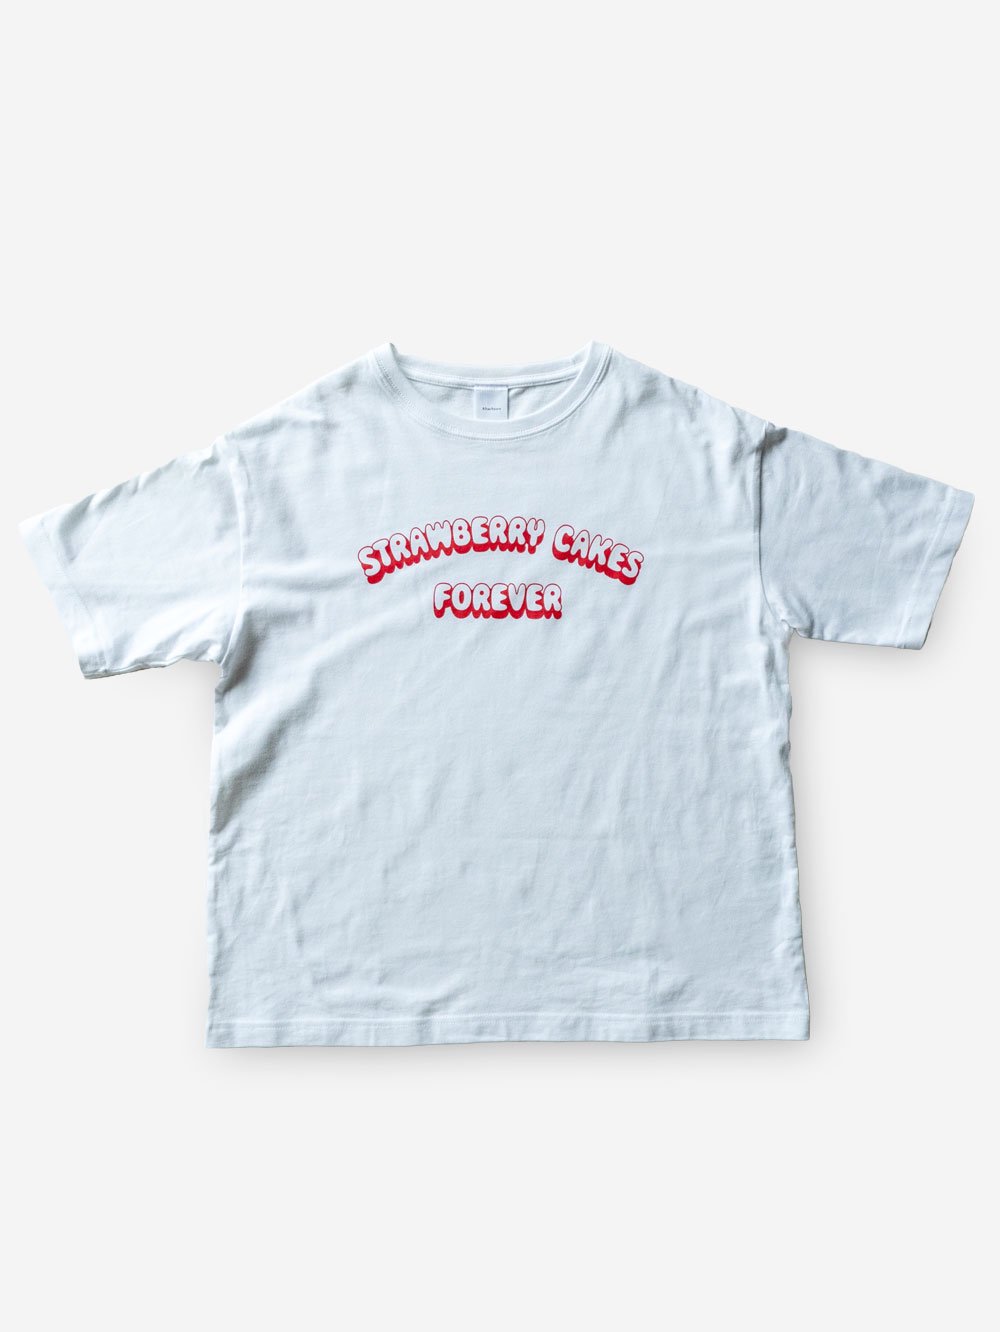 T-Shirt「STRAWBERRY CAKES FOREVER」クッキー付